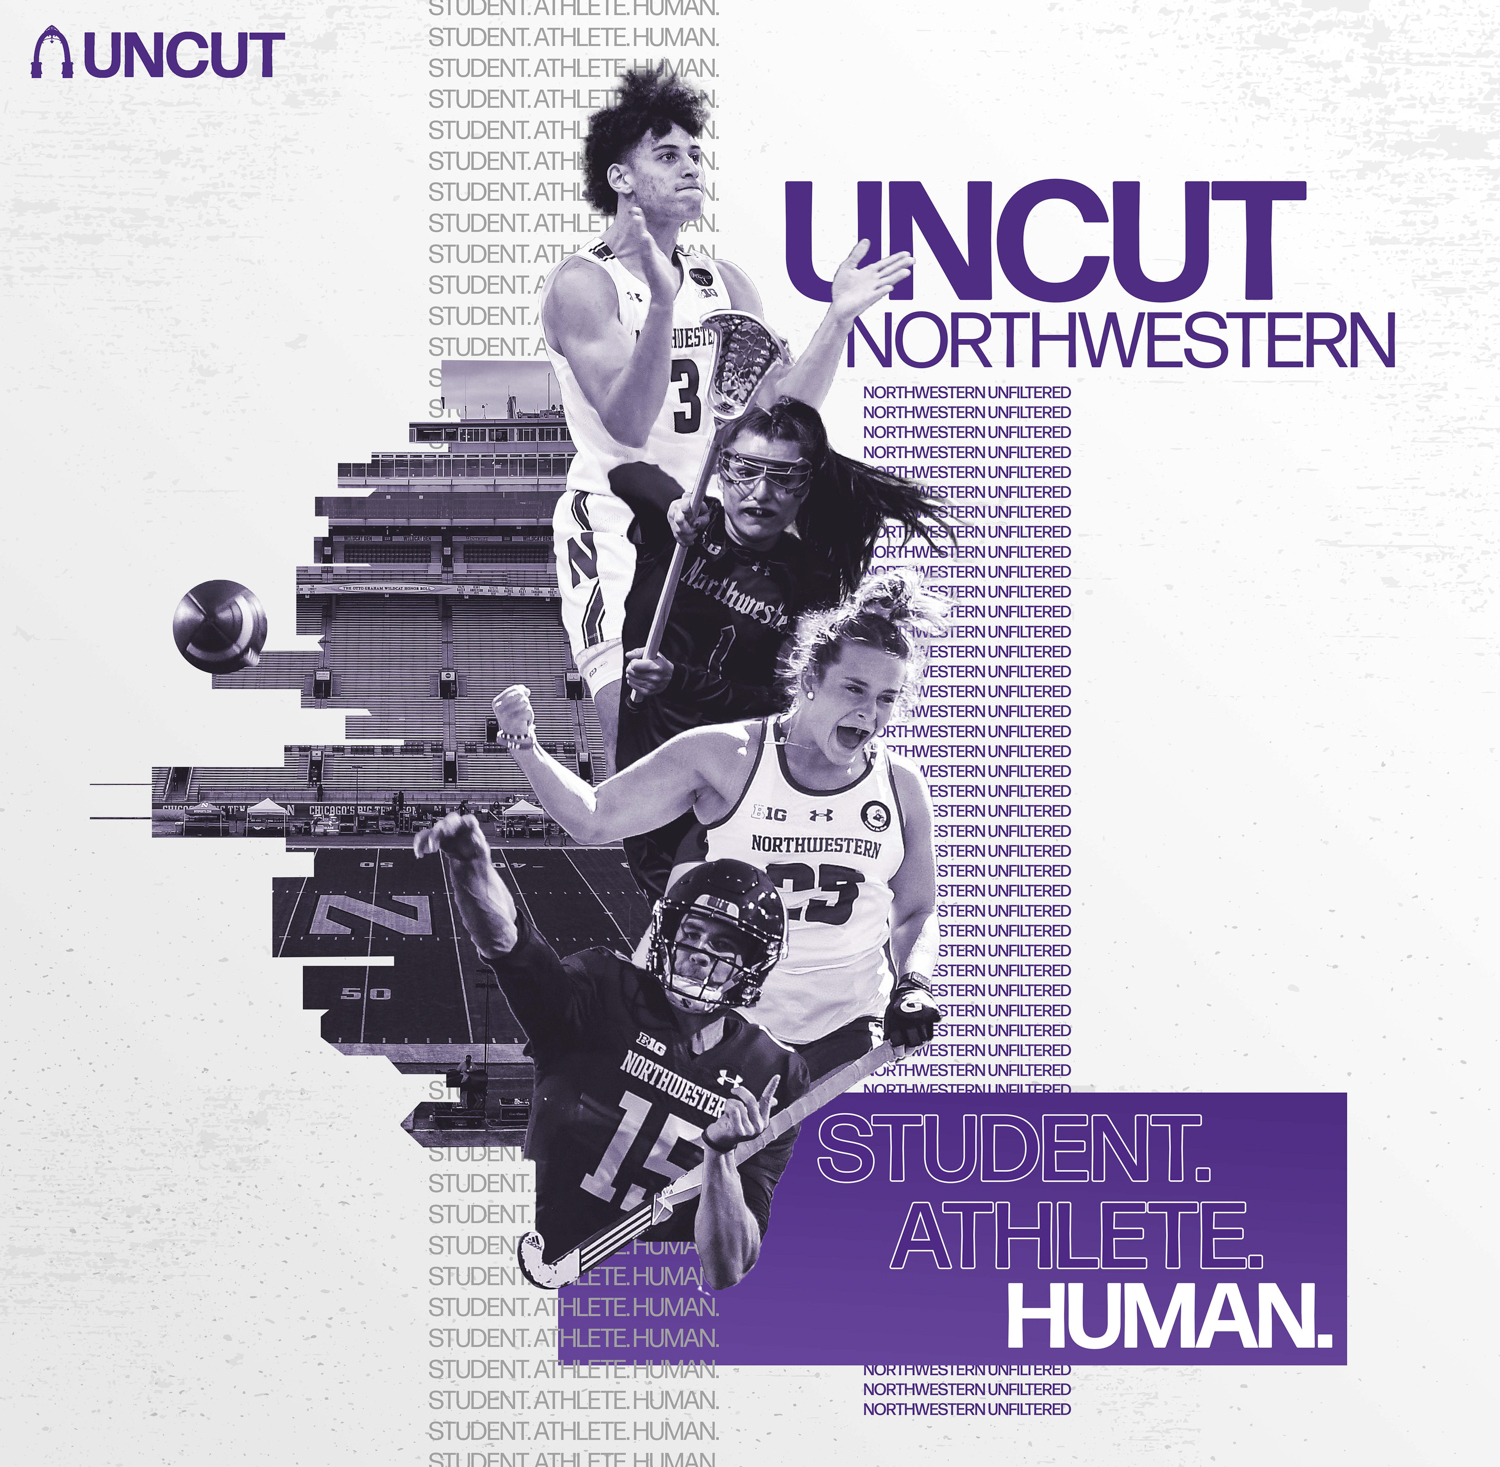 Launch graphic for UNCUT Northwestern's social media accounts